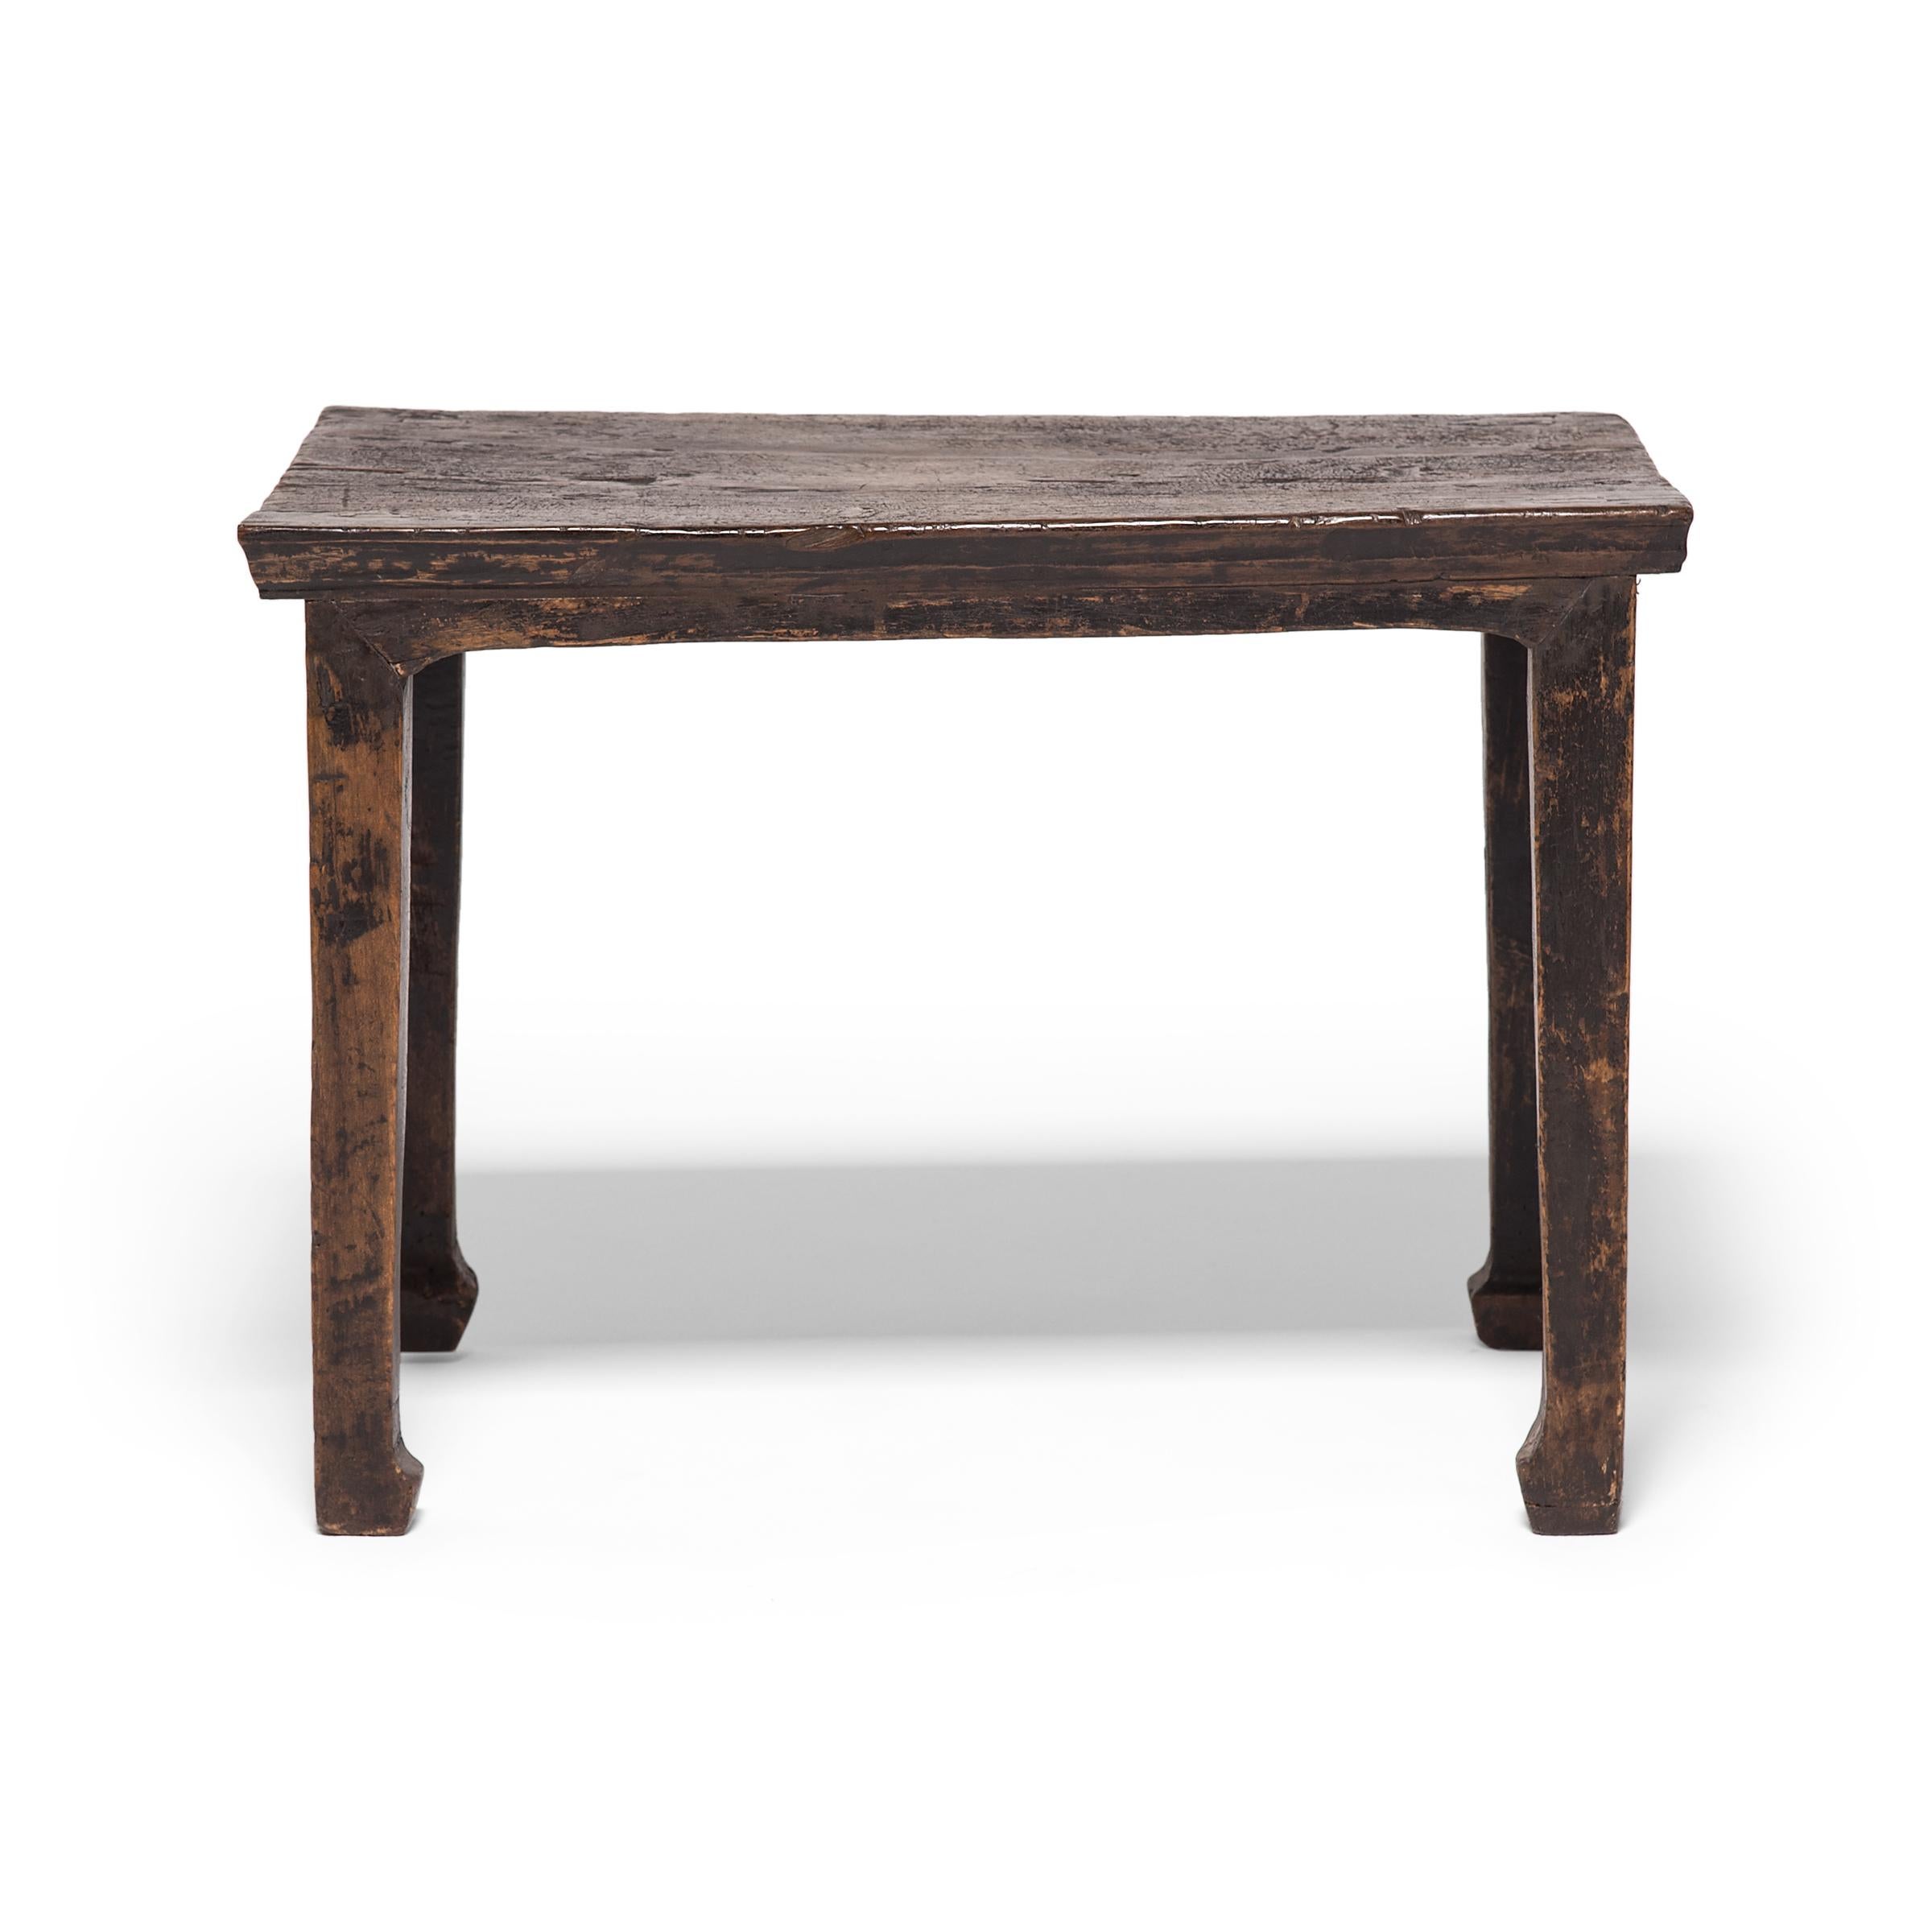 Qing Chinese Hoofed Foot Side Table, c. 1700 For Sale